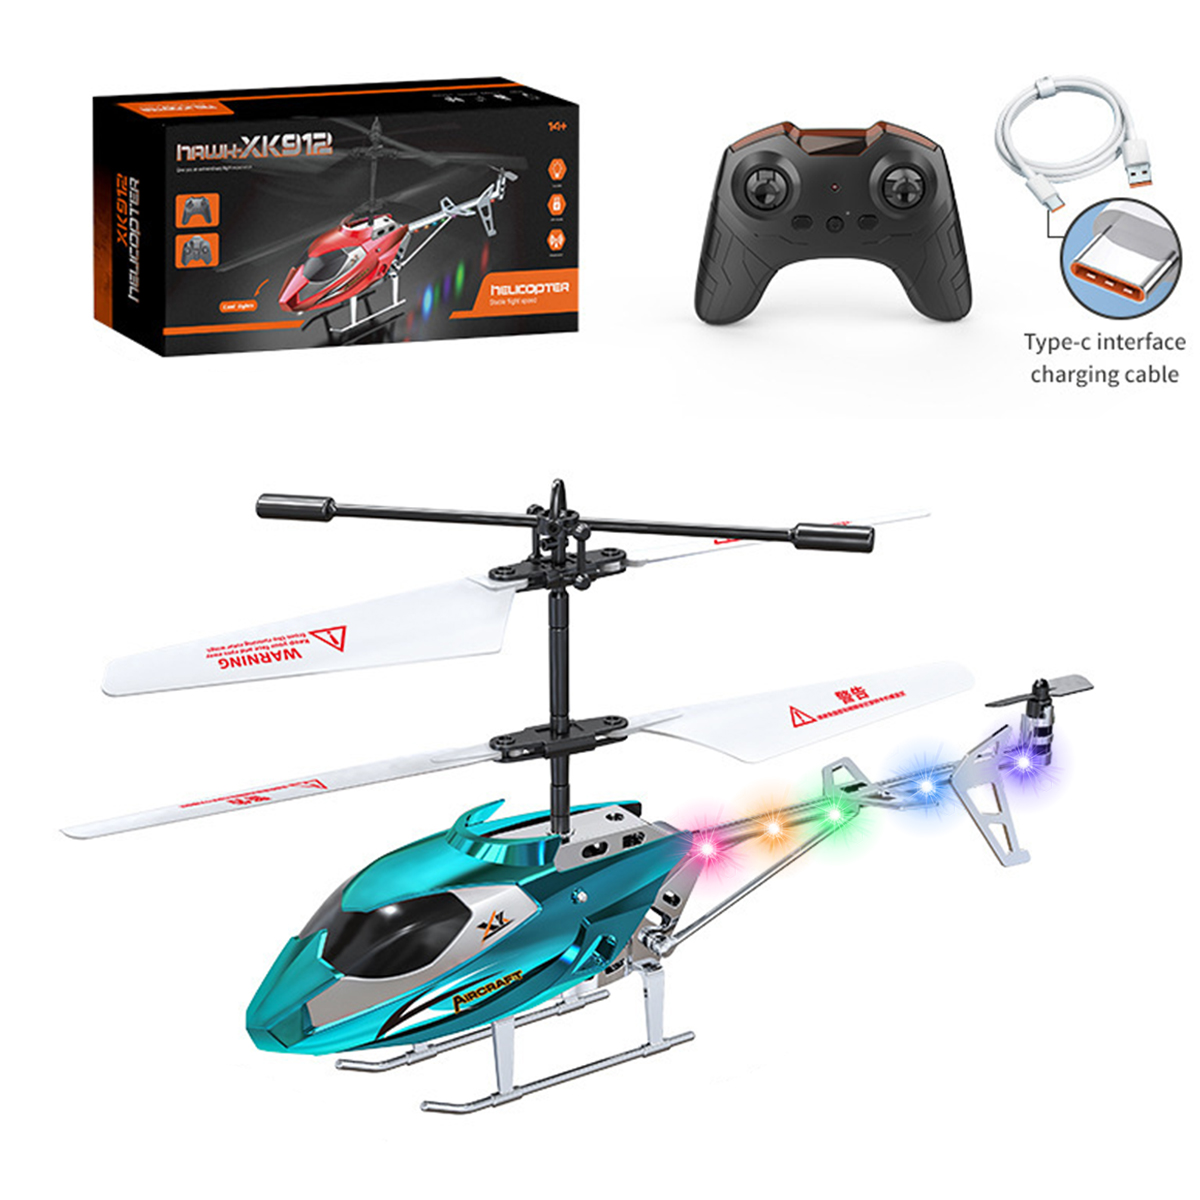 PayUSD Remote Control Helicopter Mini Gyroscope RC Helicopters LED Light for Indoor to Fly for Kids and Beginners, Blue - image 1 of 8